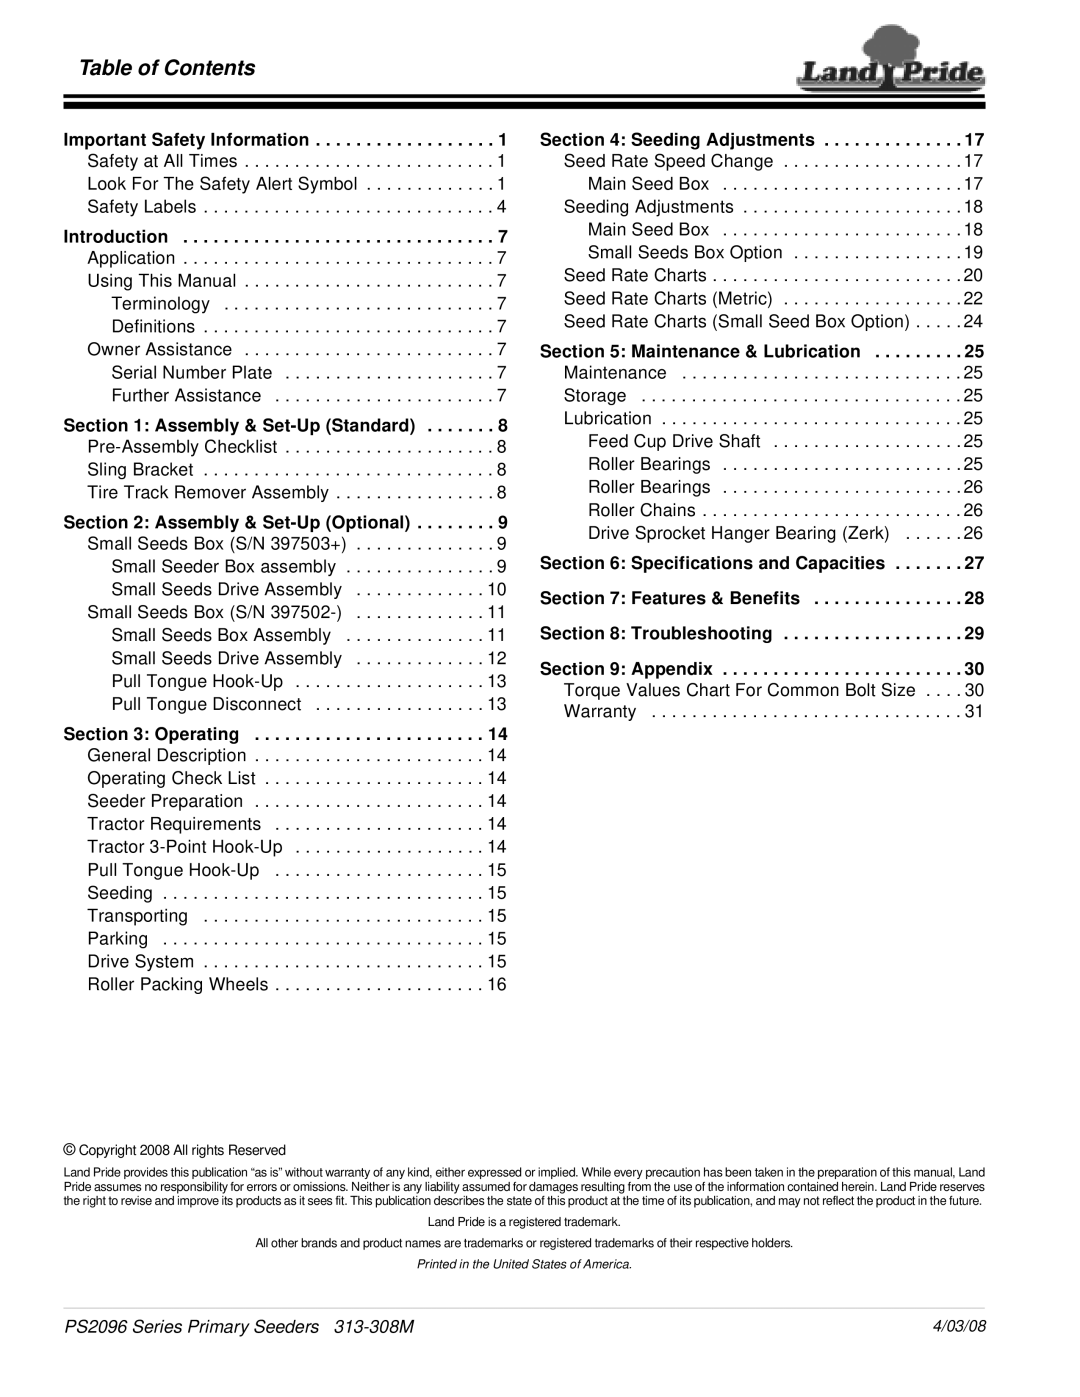 Land Pride manual Table of Contents, PS2096 Series Primary Seeders 313-308M 